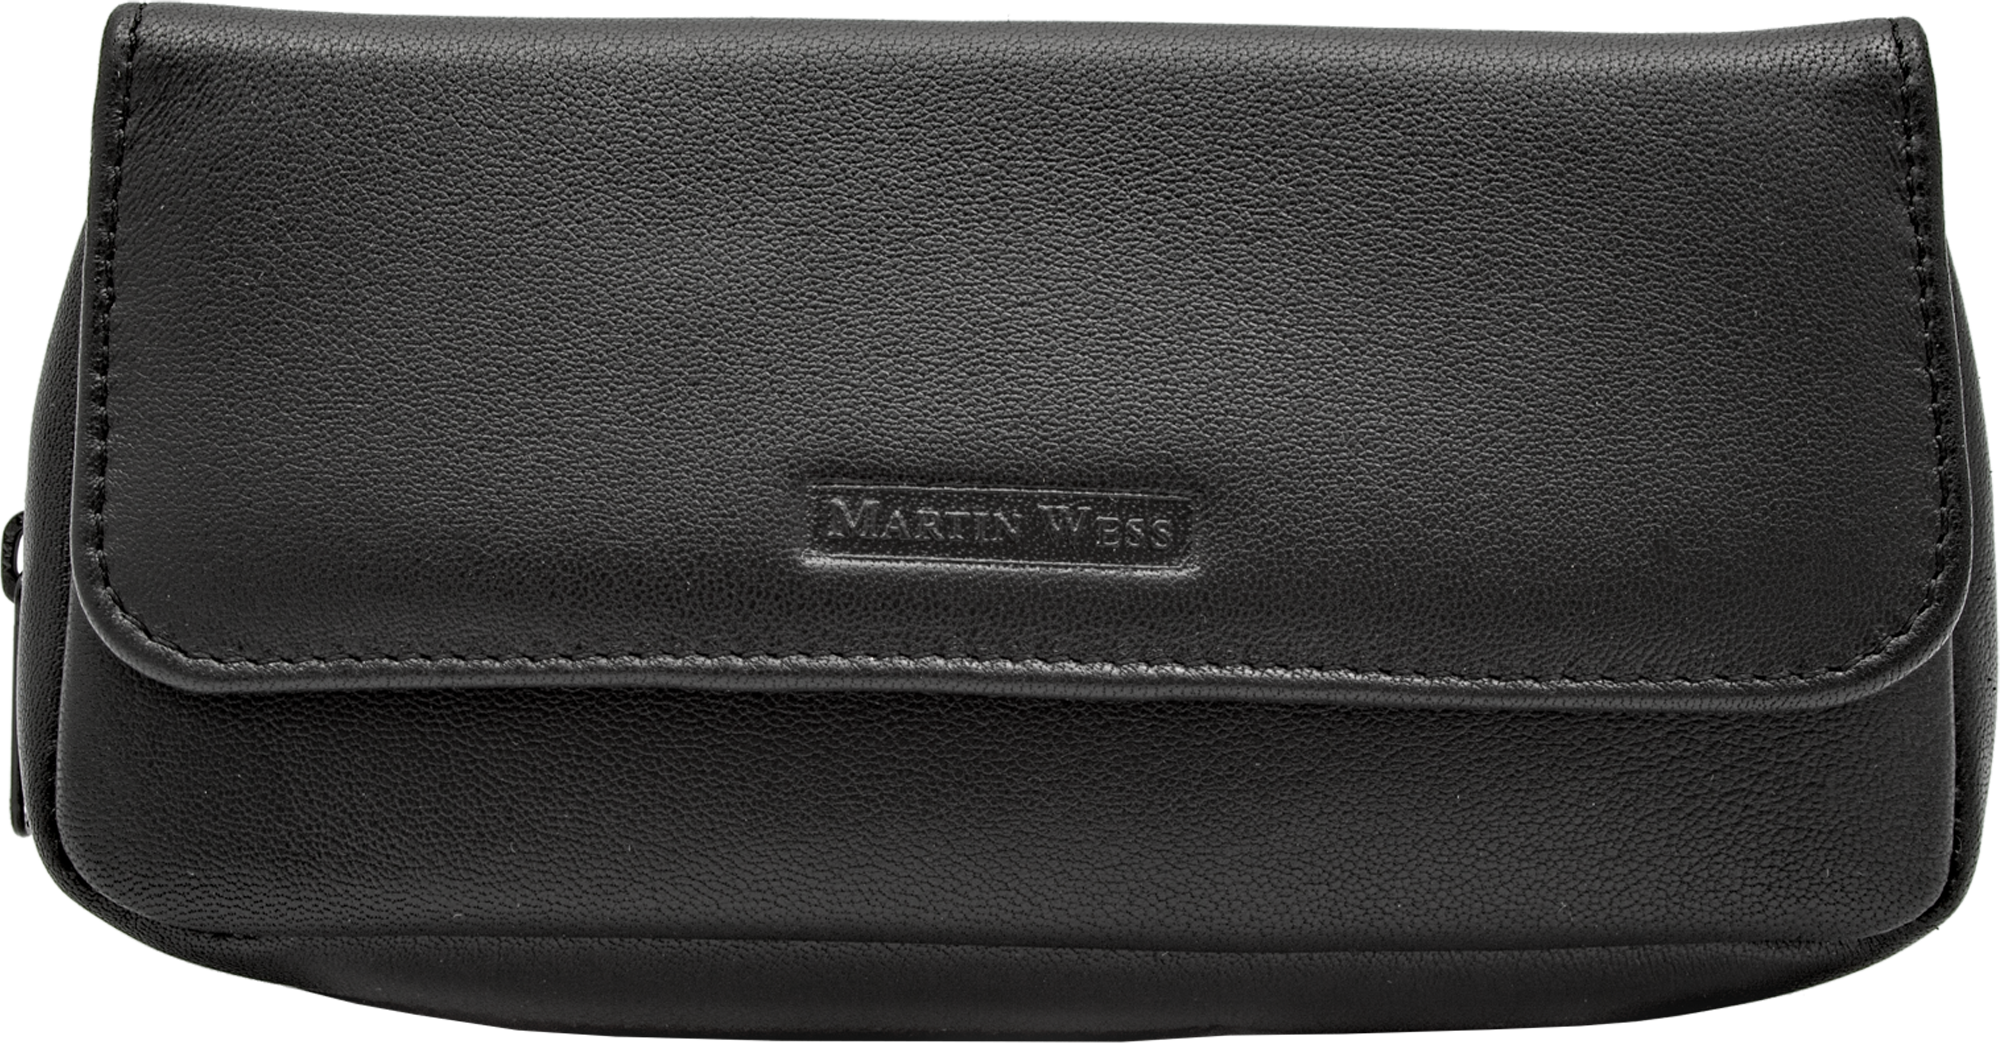 Martin Wess Lea K 15 Combo Pouch